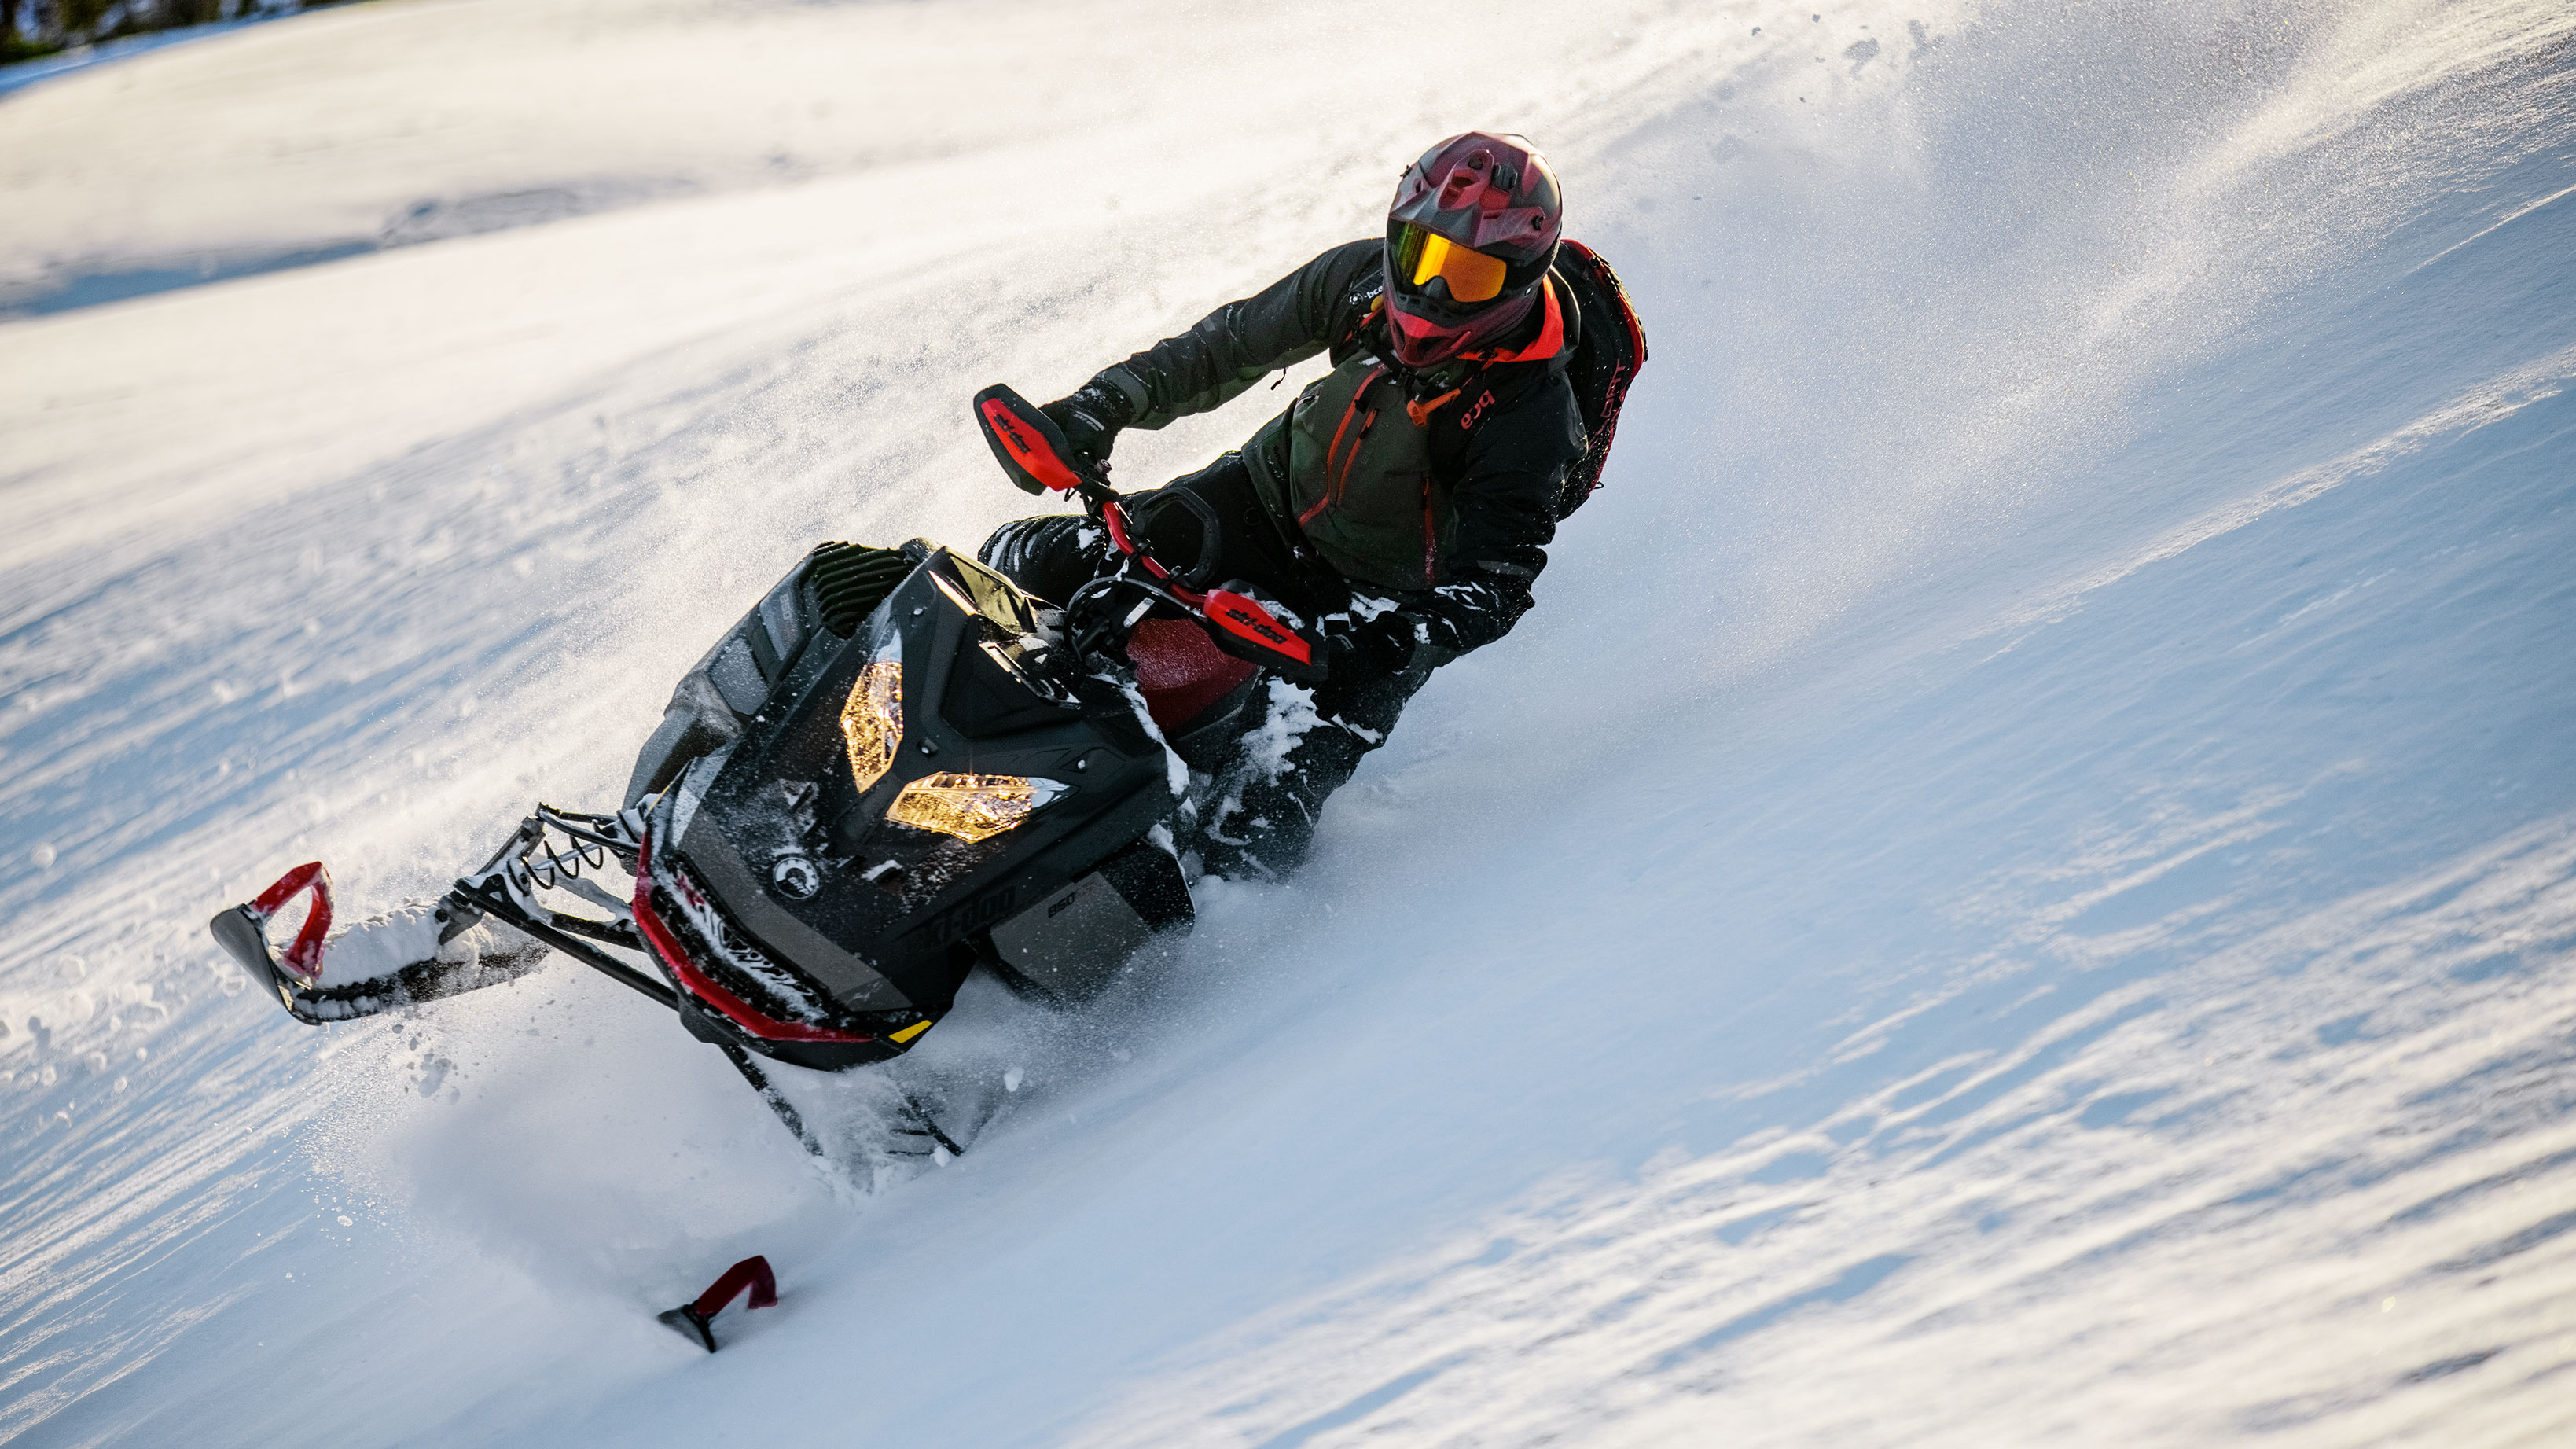 Men riding in deep Snow with a Ski-Doo Sumit